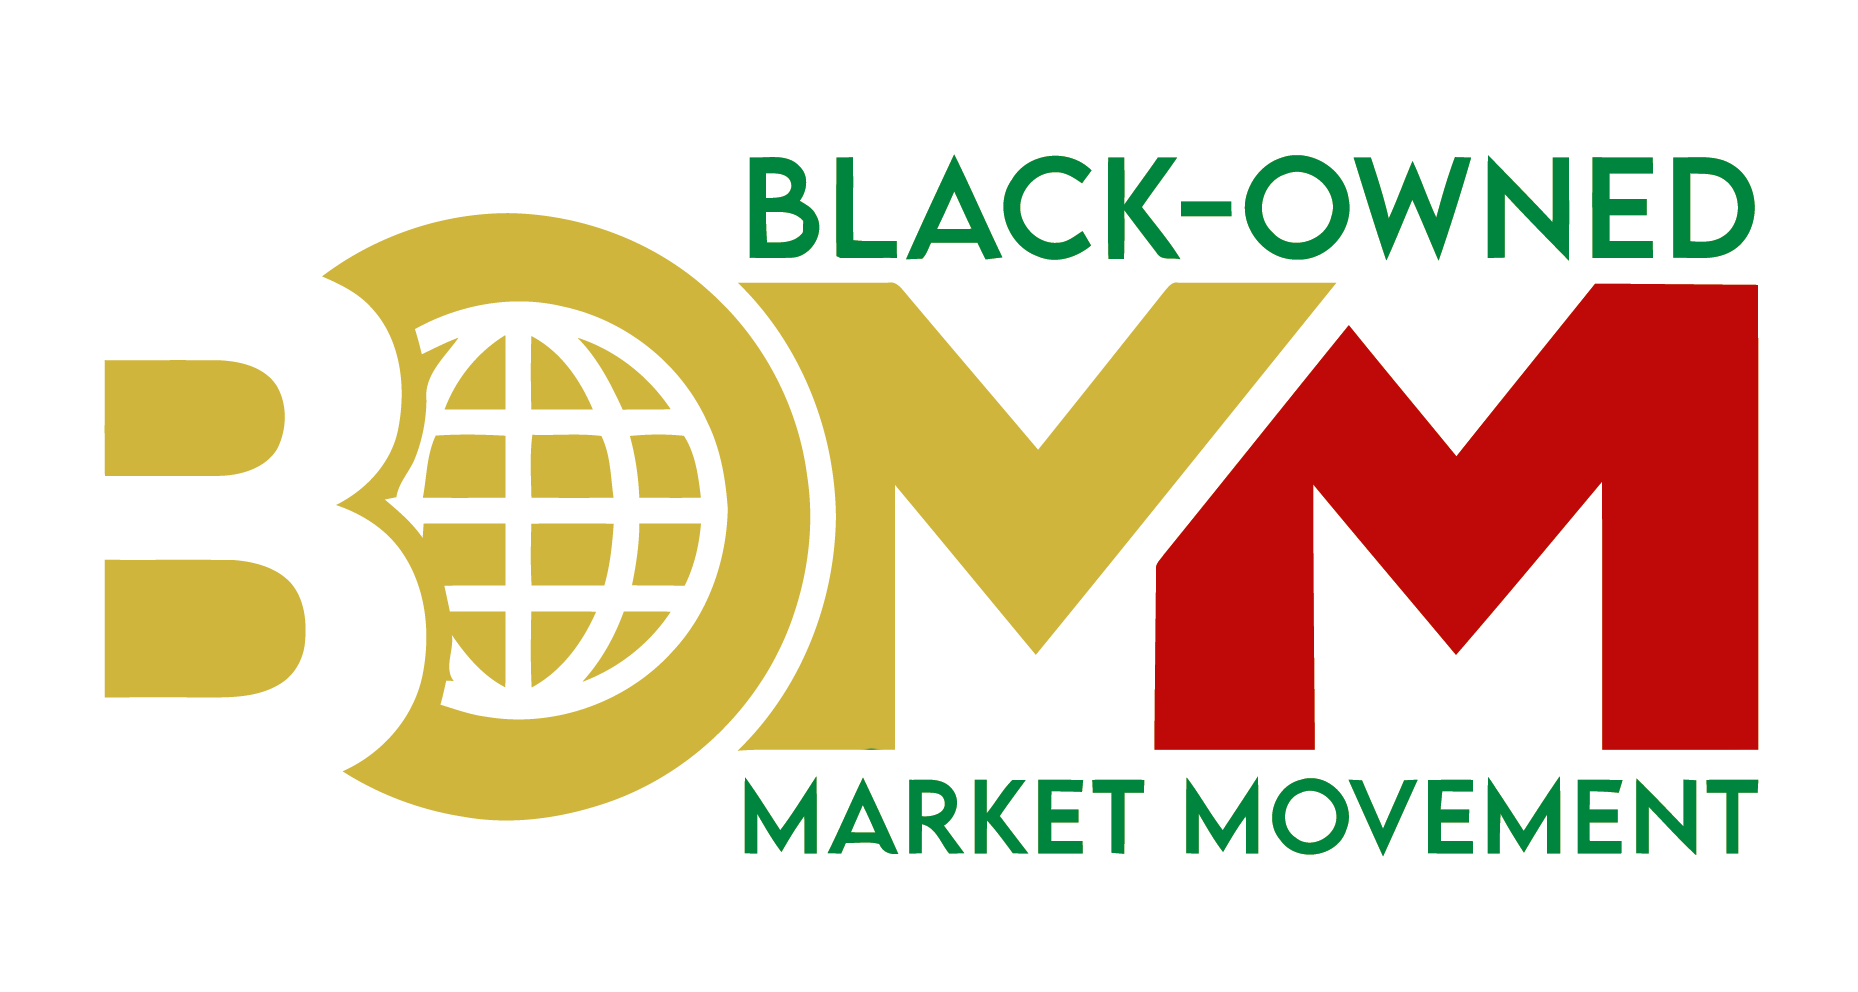 The Black-Owned Market